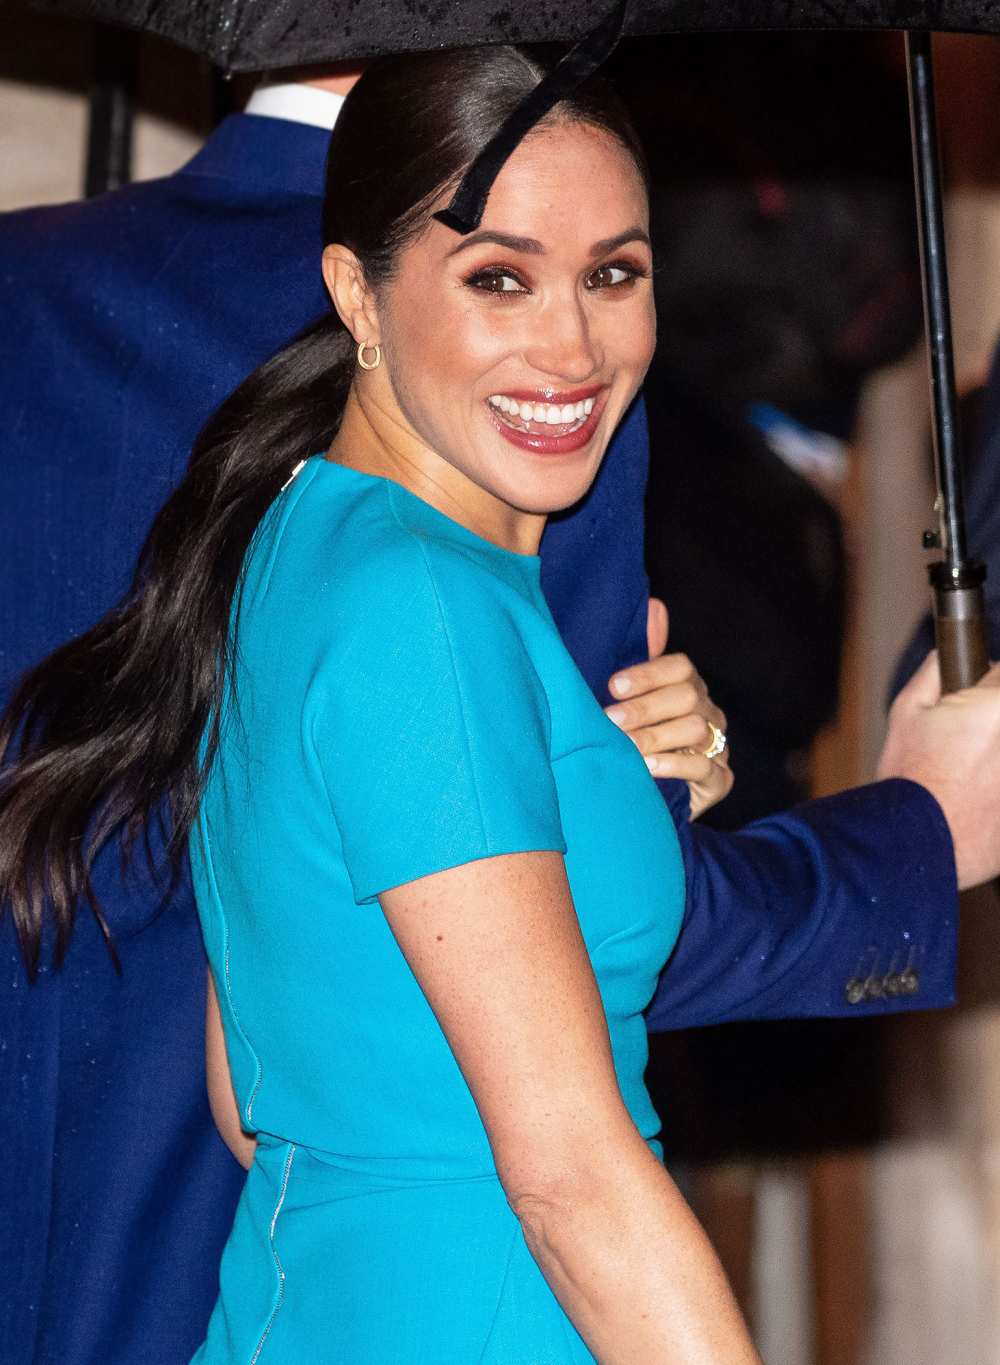 Meghan Markle May Have Just Hinted at the Sex of the Baby